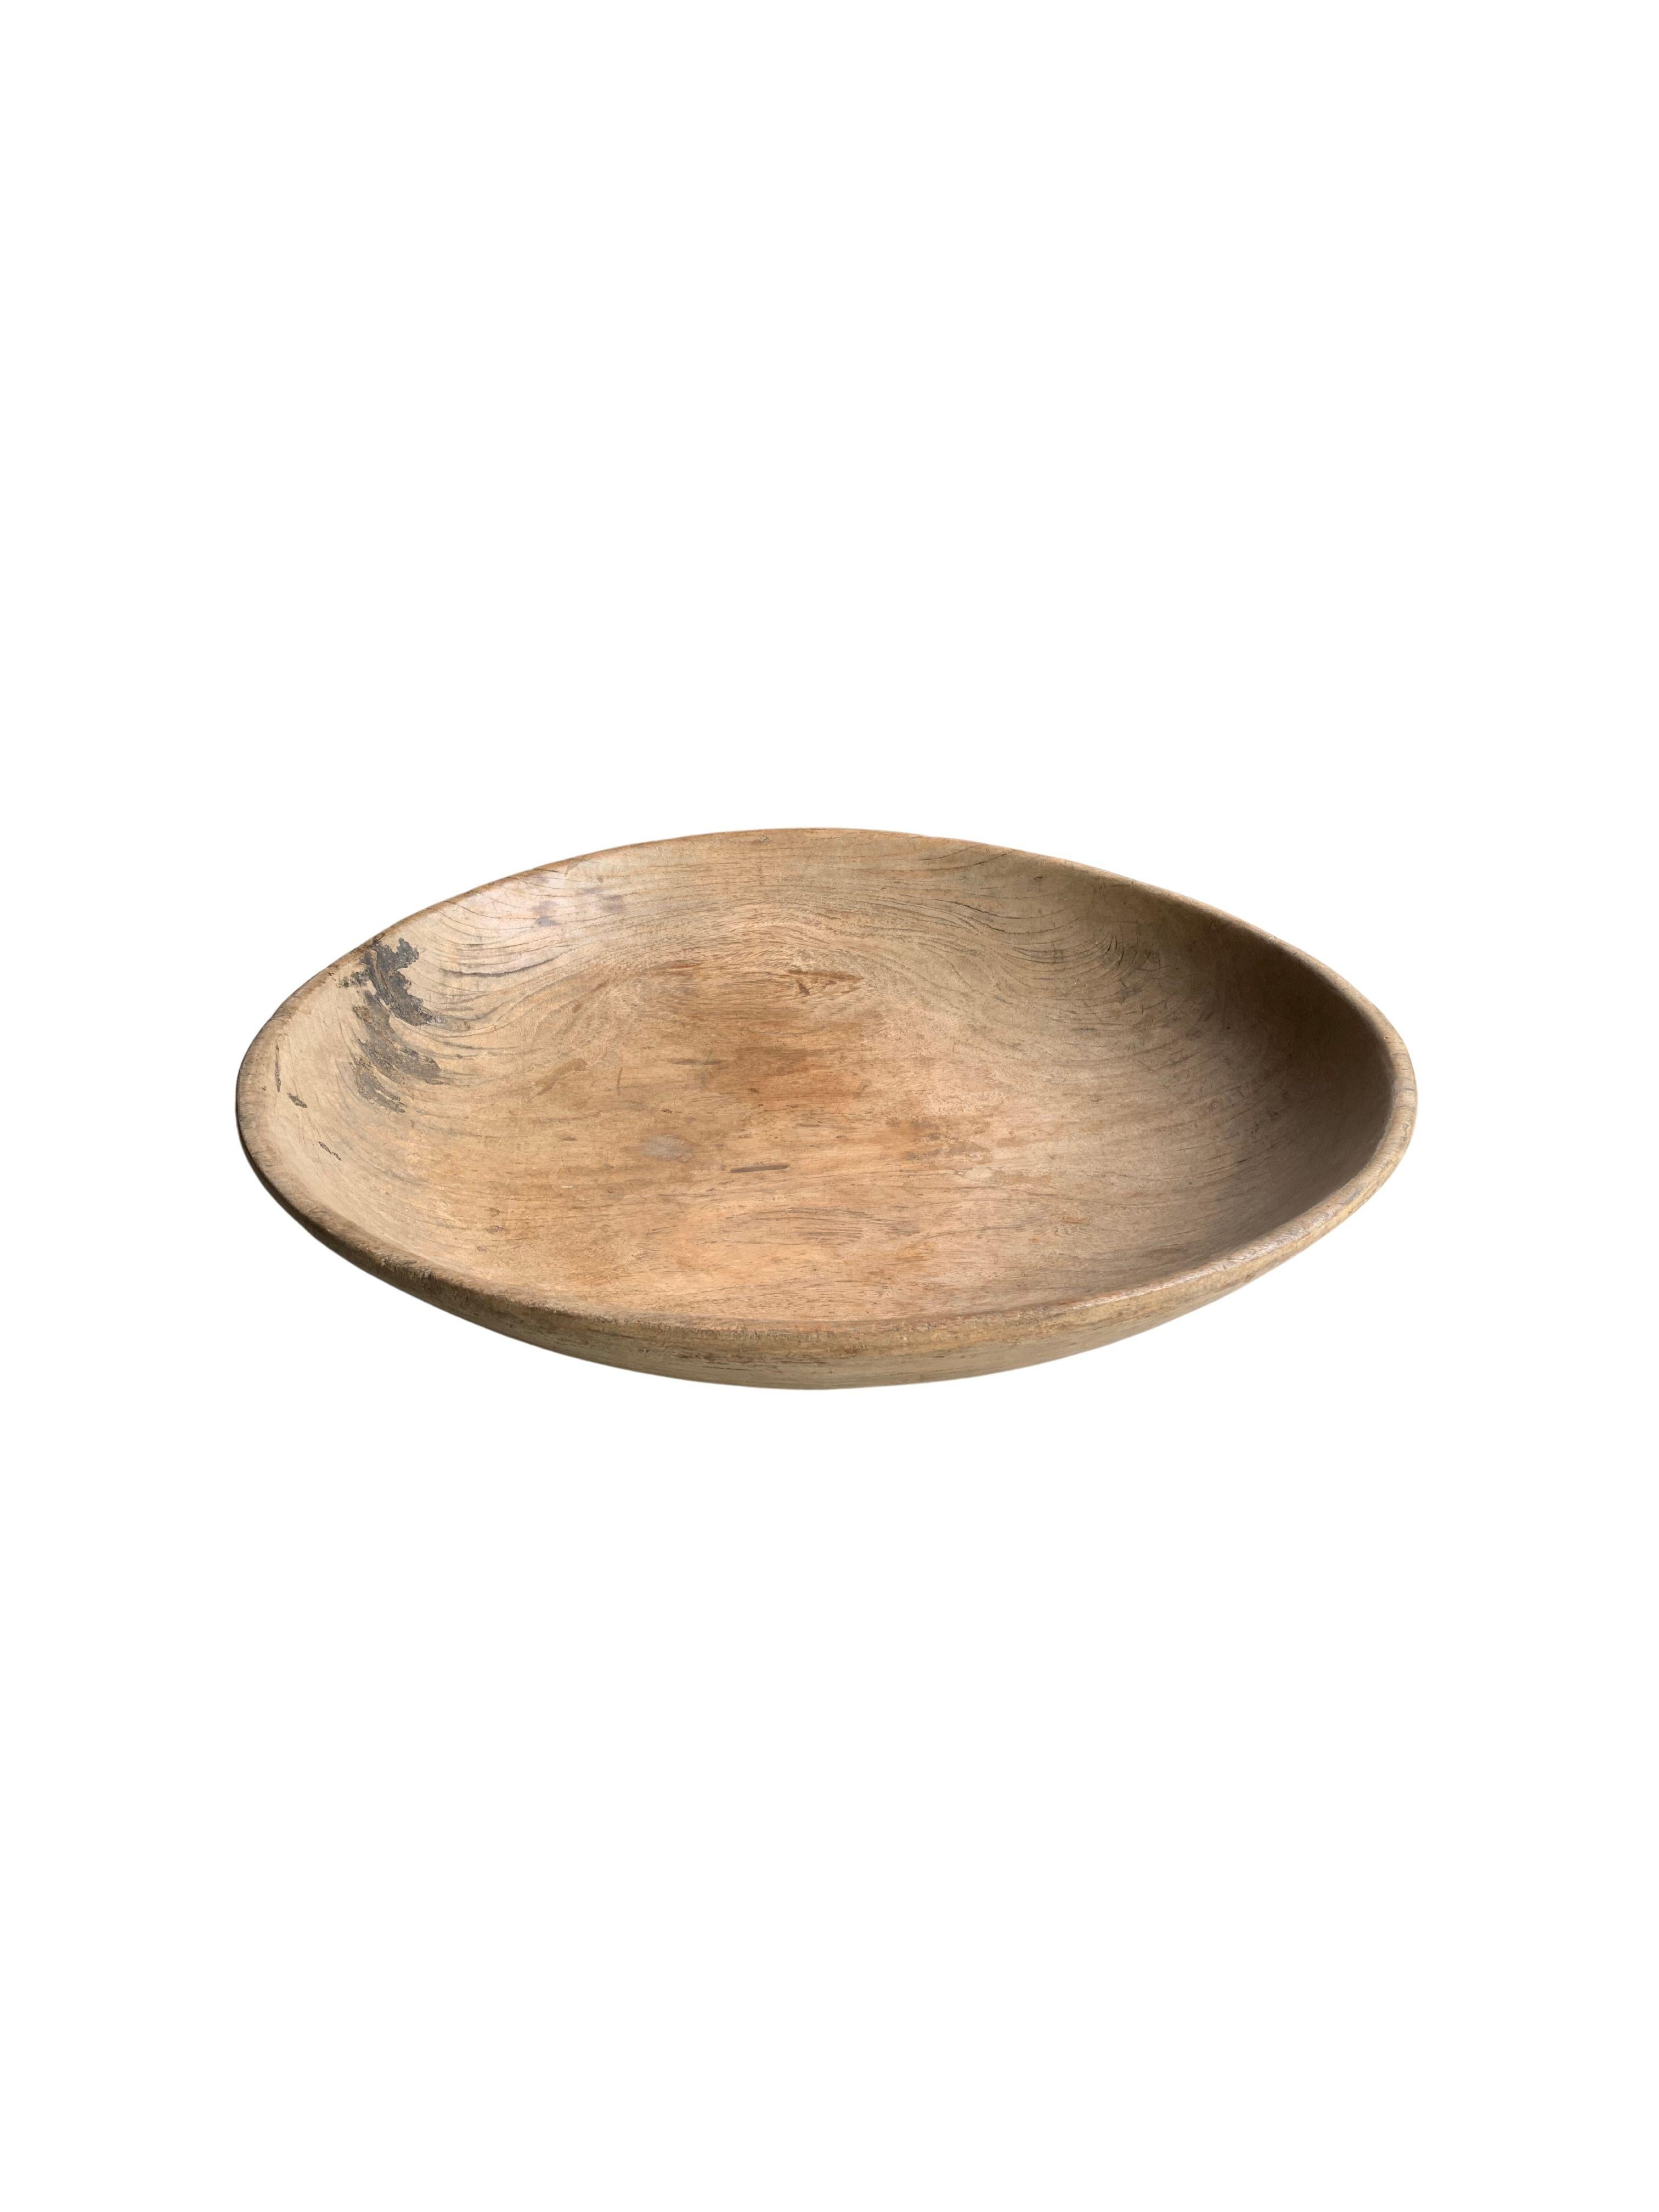 Crafted from fruitwood this Dayak tribe ceremonial bowl features a wonderful smooth texture and subtle wood patterns all around. A wonderful decorative bowl or table centrepiece certain to invoke conversation. The Dayak Tribes are largely situated